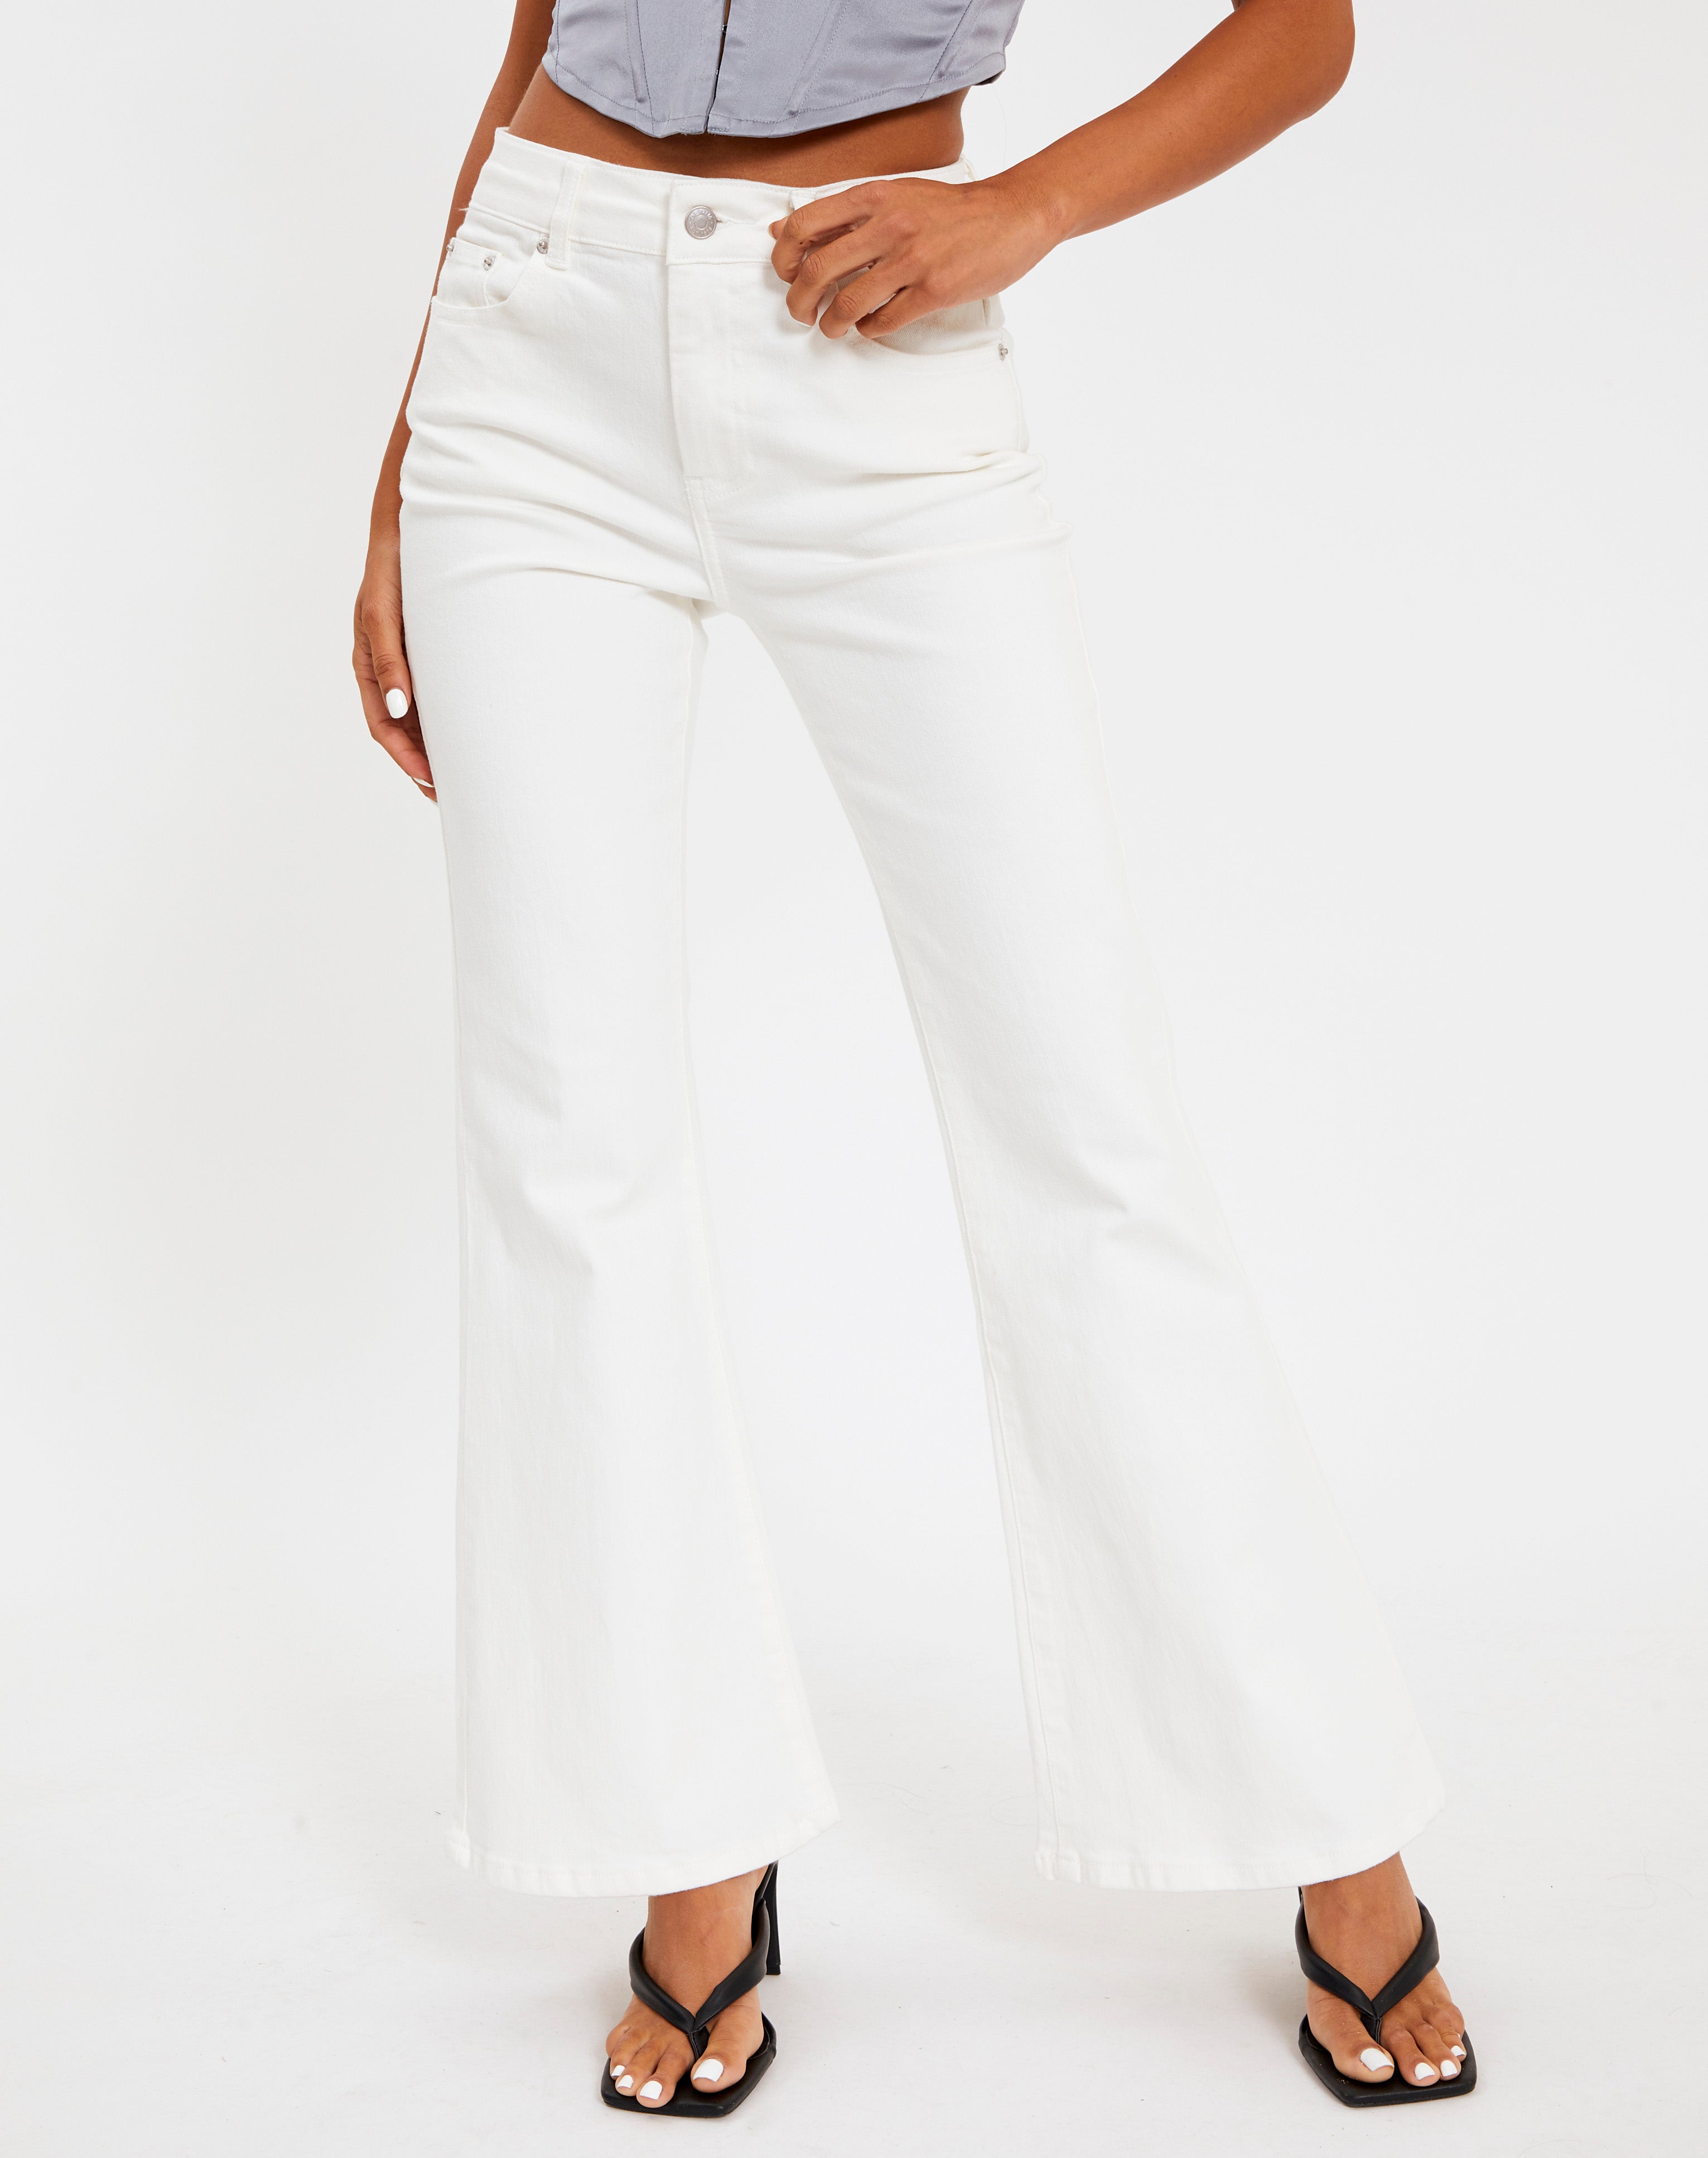 Low Rise Flared Jean in White | Glassons